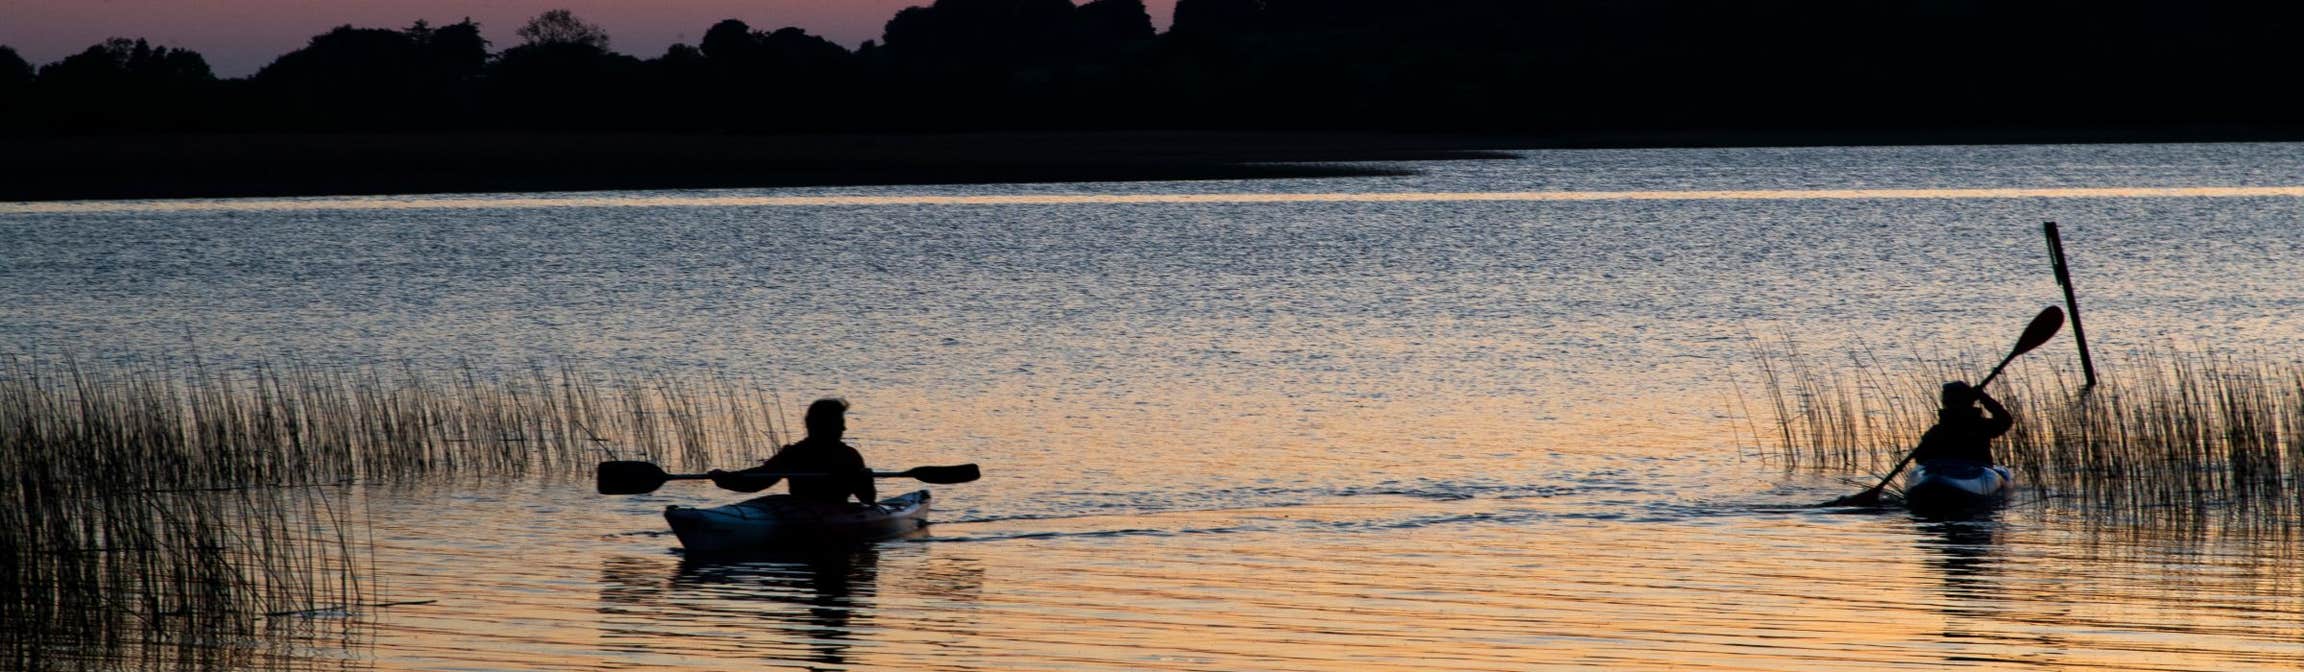 Image of kayakers in Athlone in County Westmeath